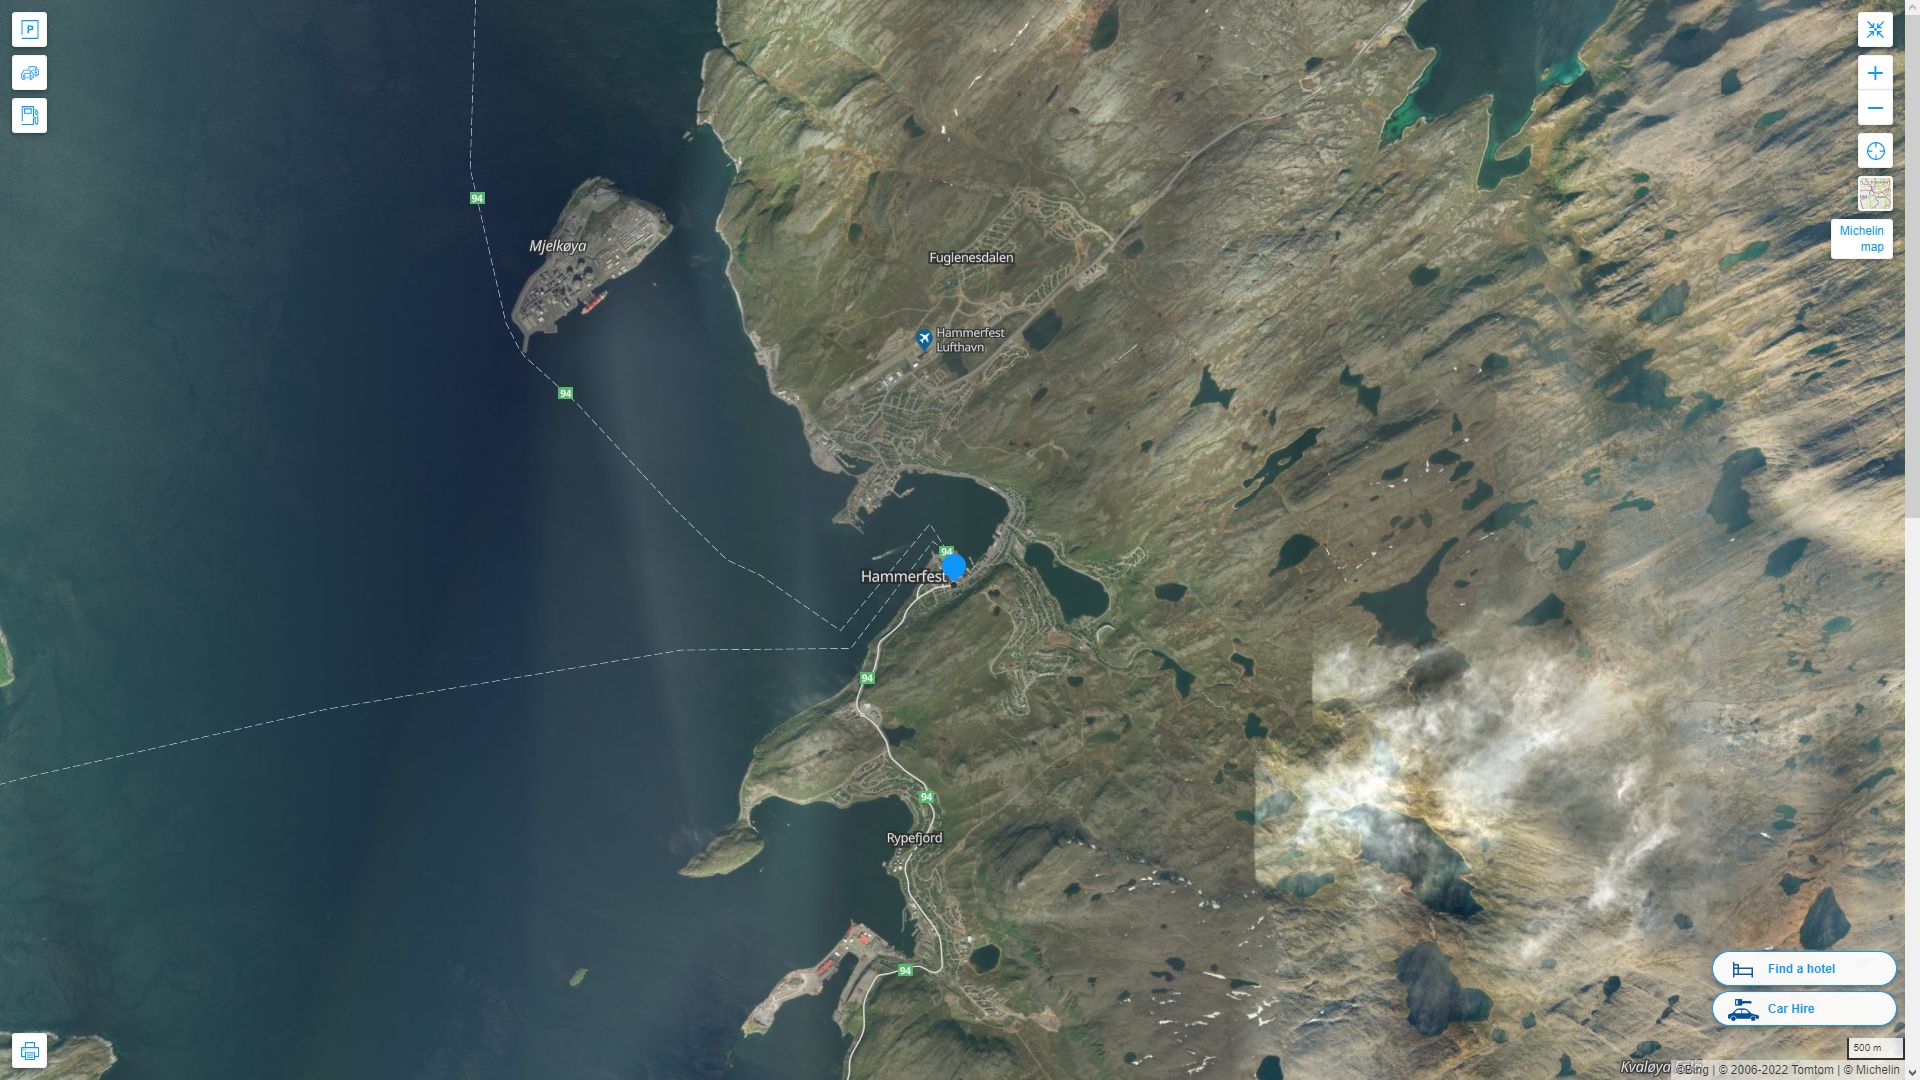 Hammerfest Highway and Road Map with Satellite View